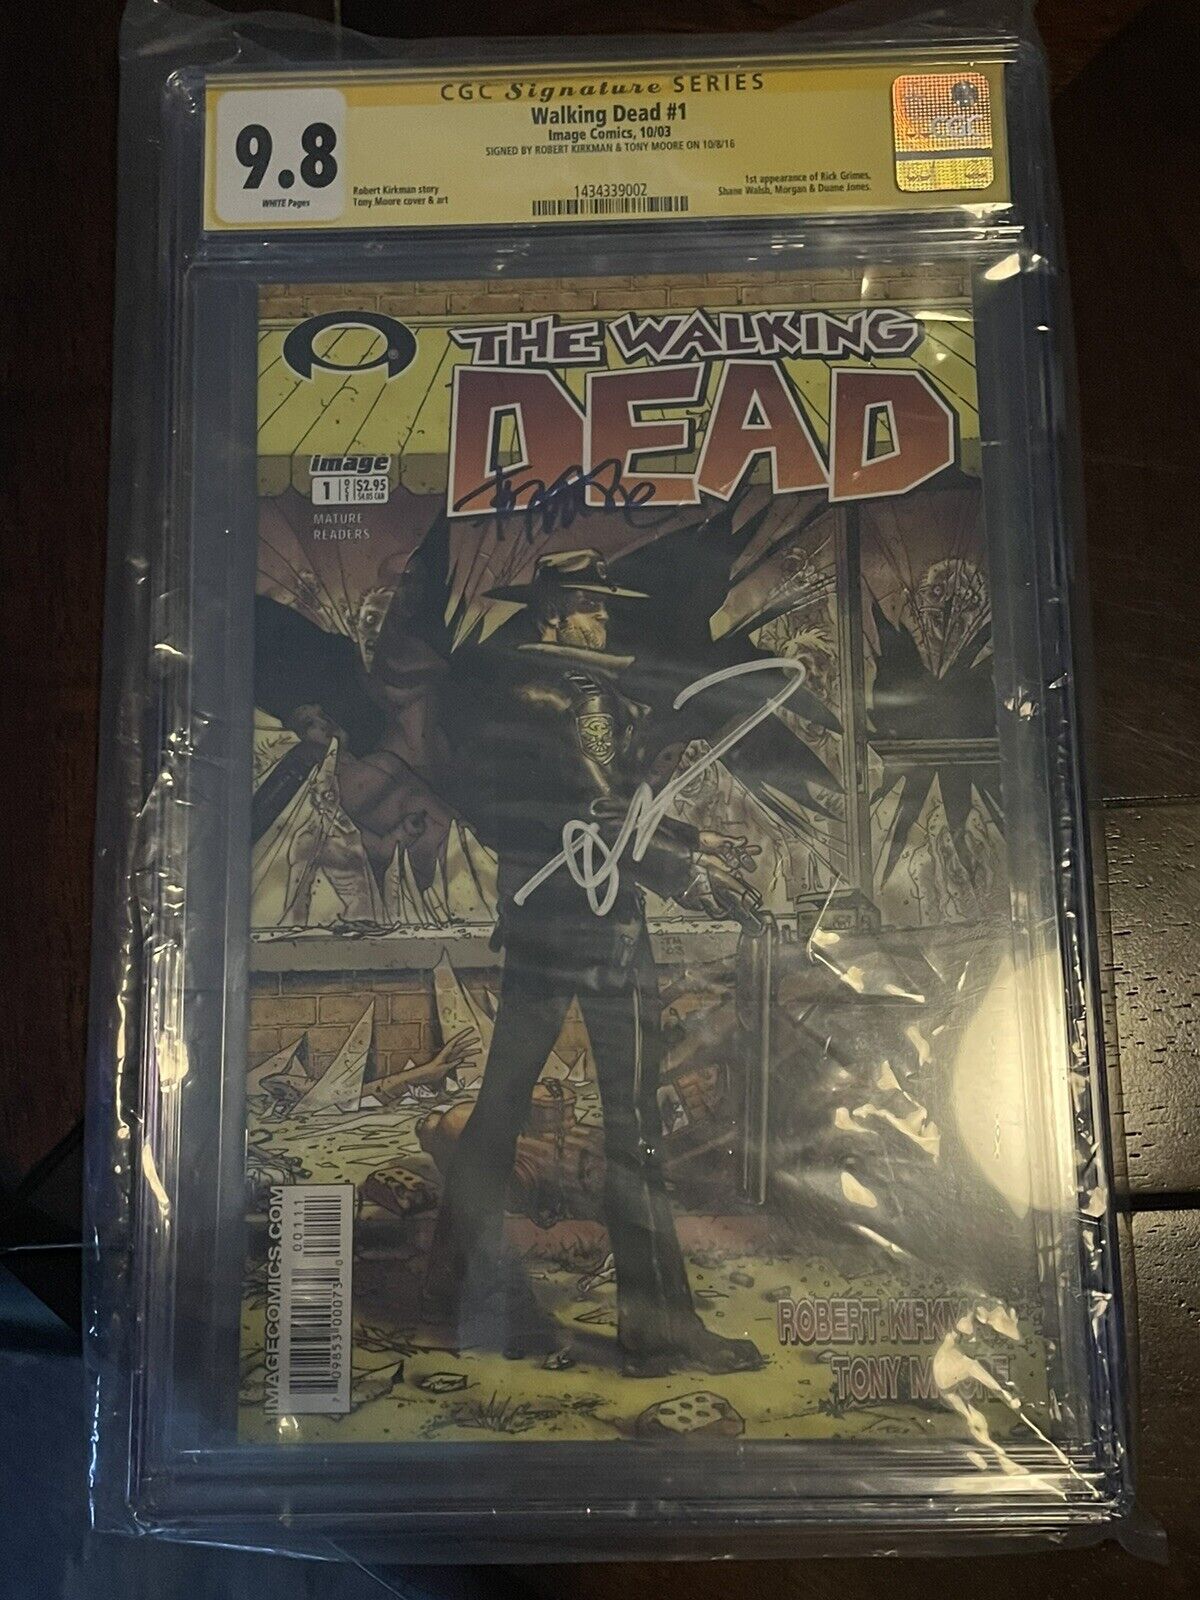 The Walking Dead #1 CGC 9.8 Signed By Robert Kirkman And Tony Moore